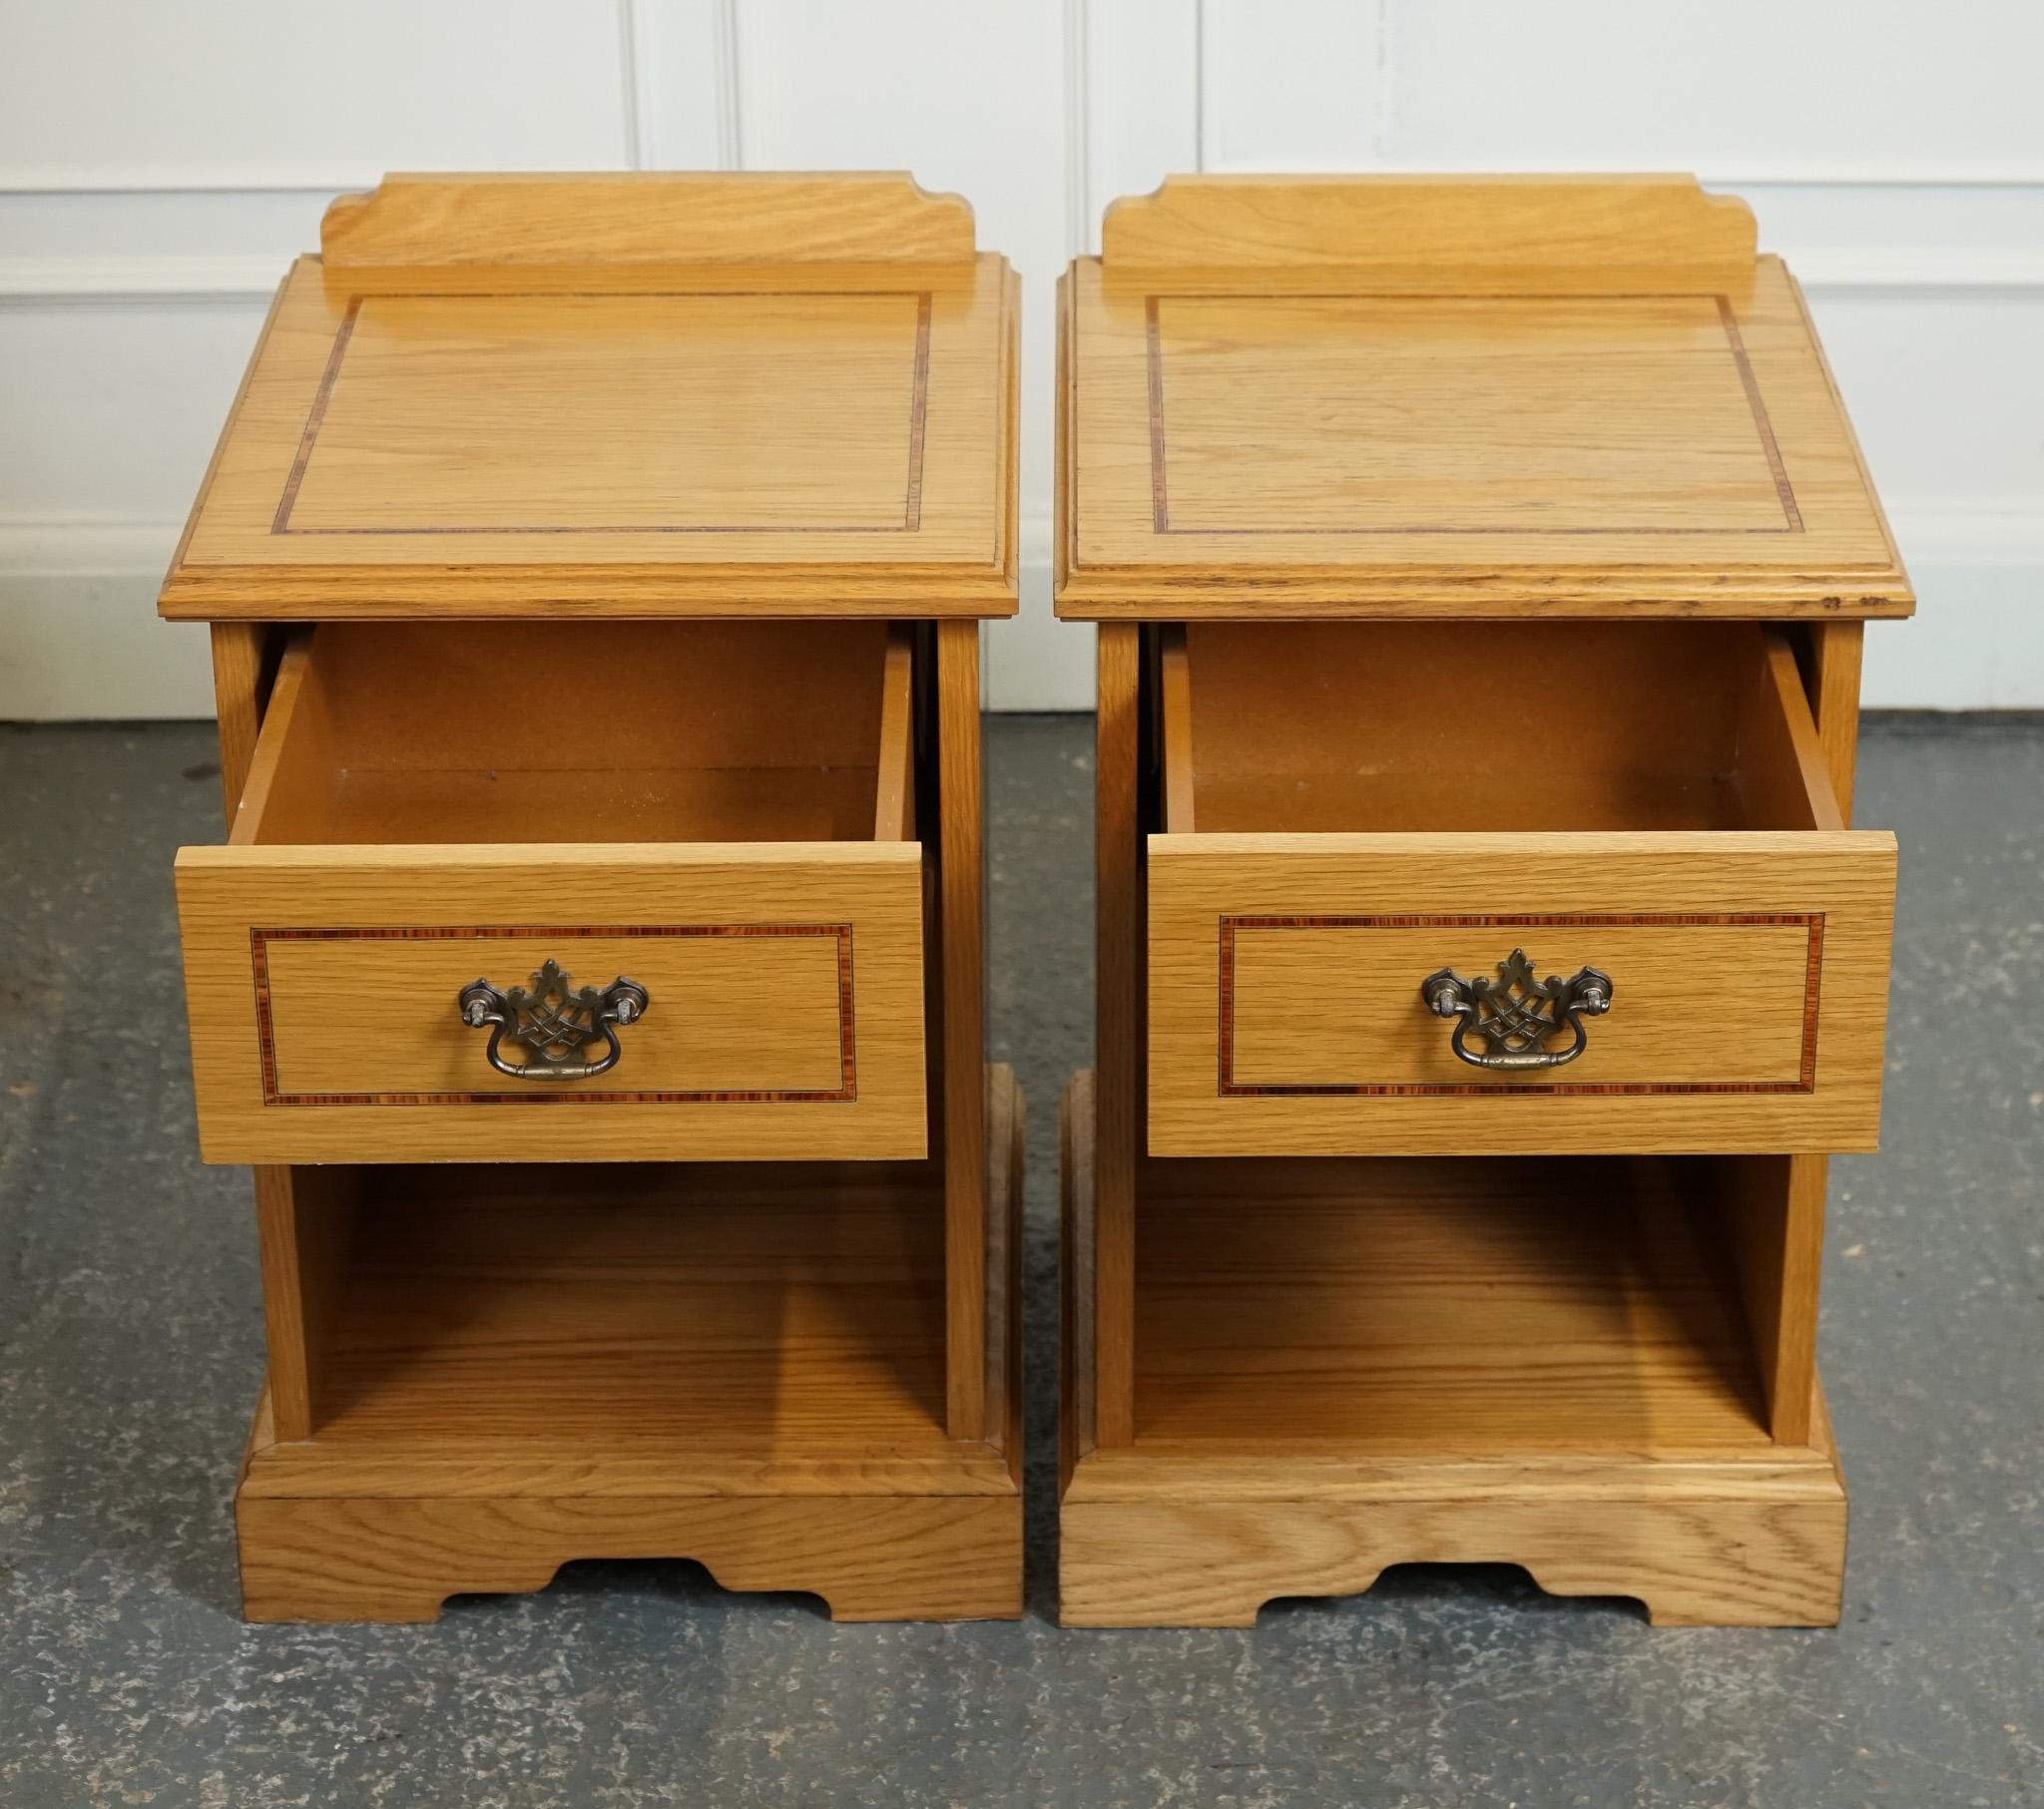 VINTAGE PAIR OF OAK KEATS BEDSIDE NIGHTSTAND CABINET MADE BY CURTIS FURNITURE j1 In Good Condition For Sale In Pulborough, GB